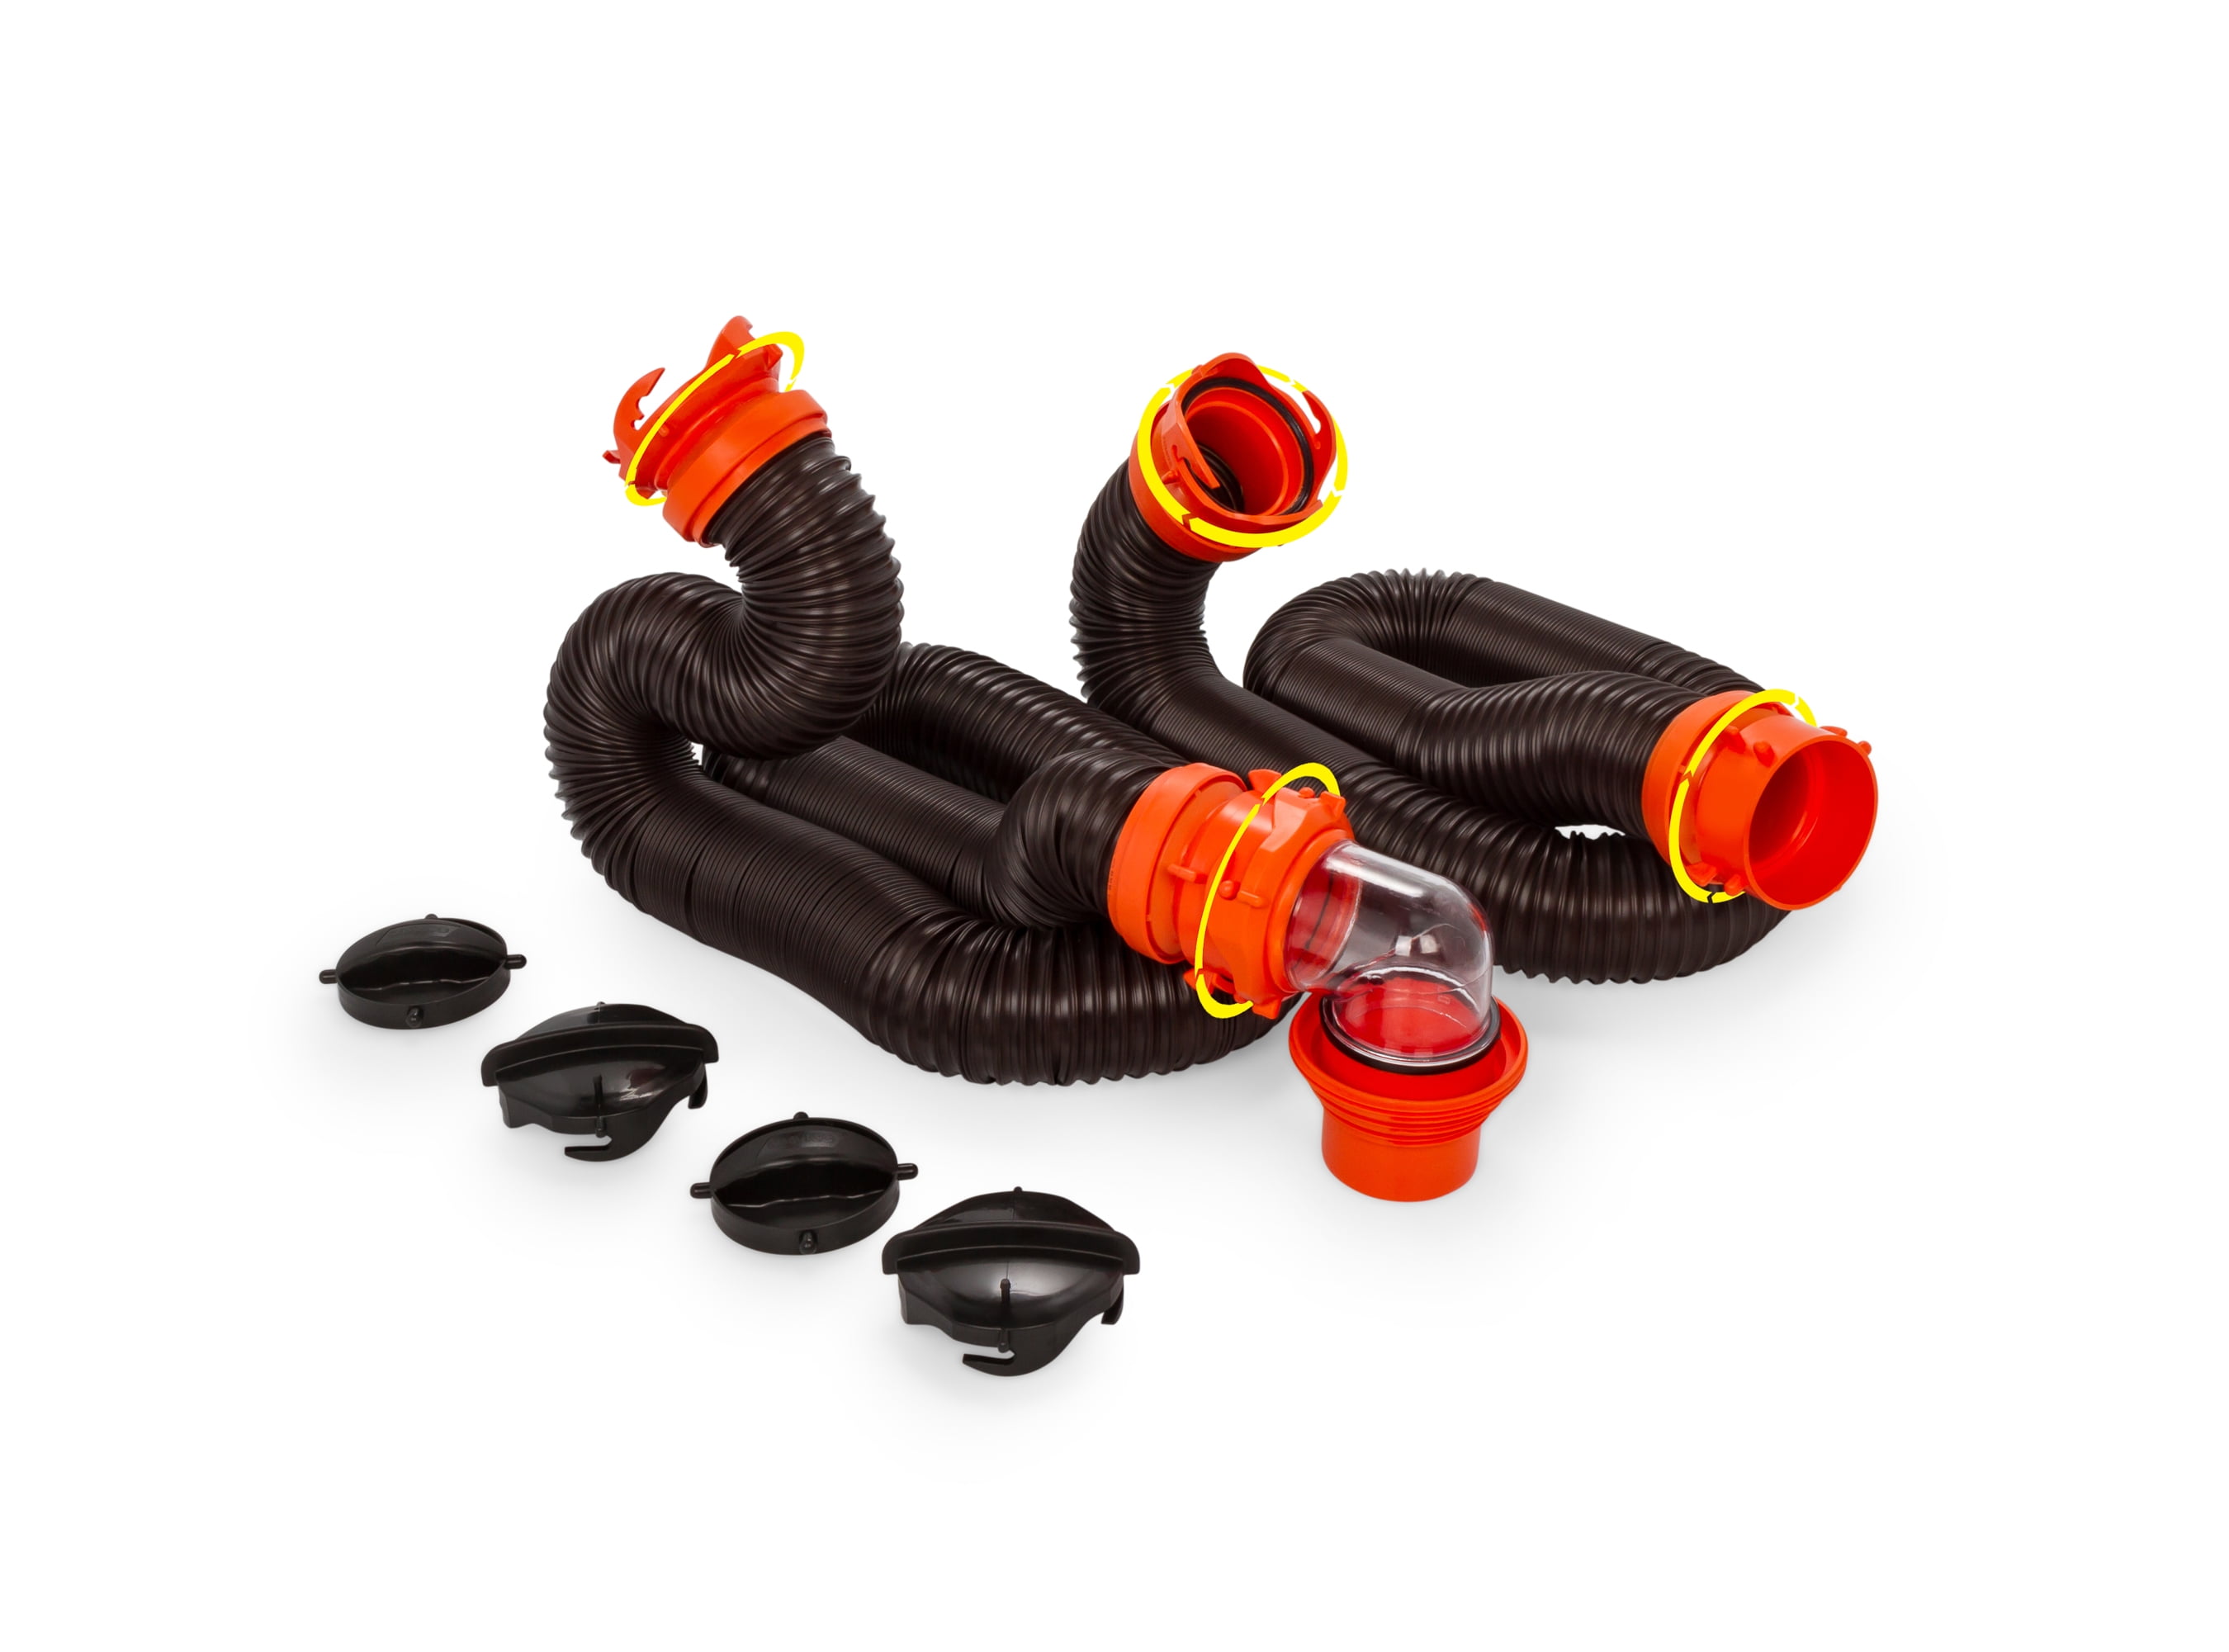 Allows for Quick and Easy RV Sewer Hose Camco Twist Connect Kit Sewer Fitting 